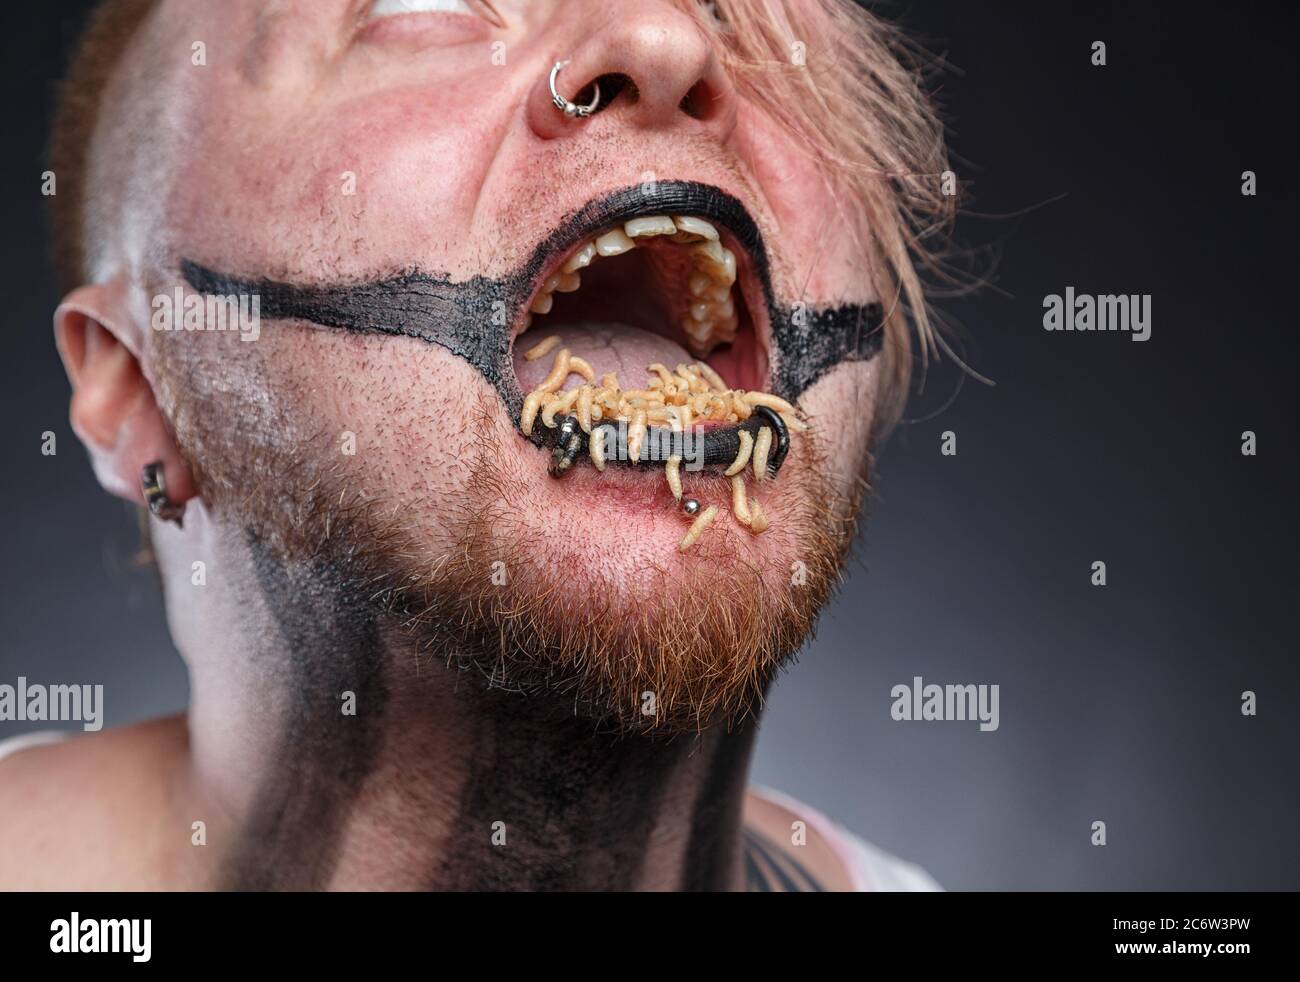 Scary mad man with maggots in his mouth Stock Photo